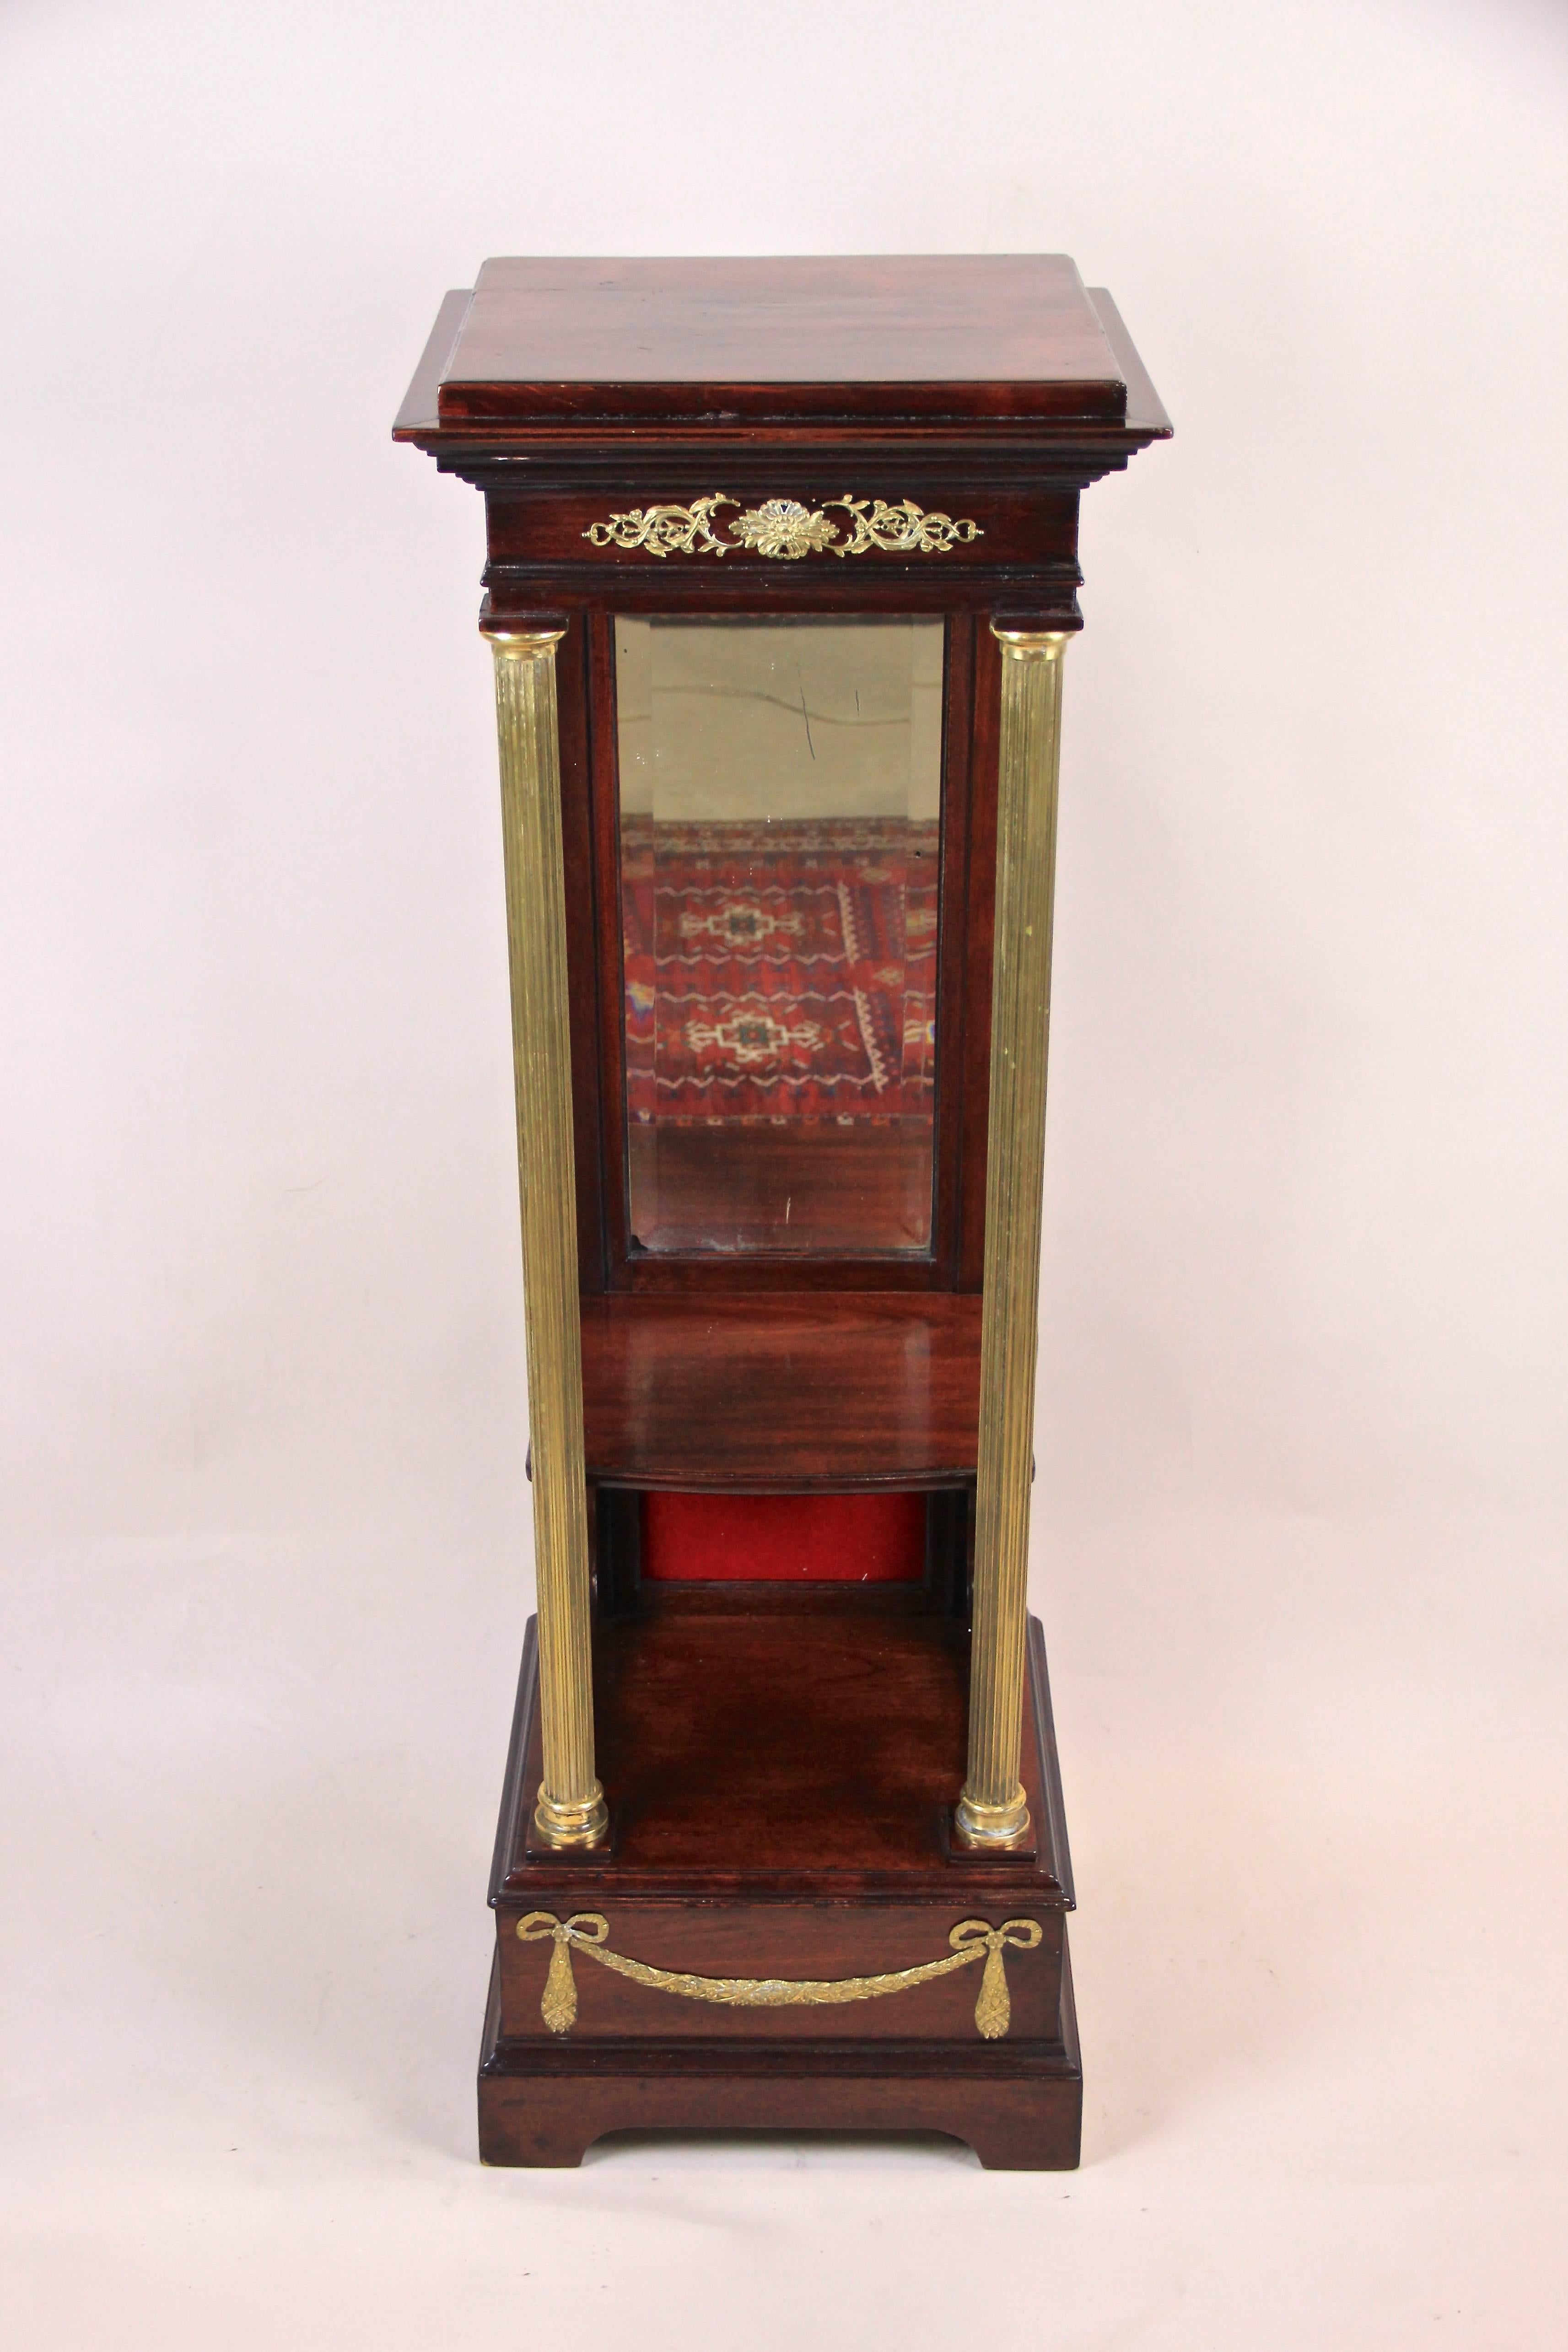 Gorgeous mahogany pedestal with mirror from the Napoleon III period in France, circa 1880. Veneered in fine mahogany this console pedestal impresses with a great design and beautiful details like the brass columns or lovely applications on the front